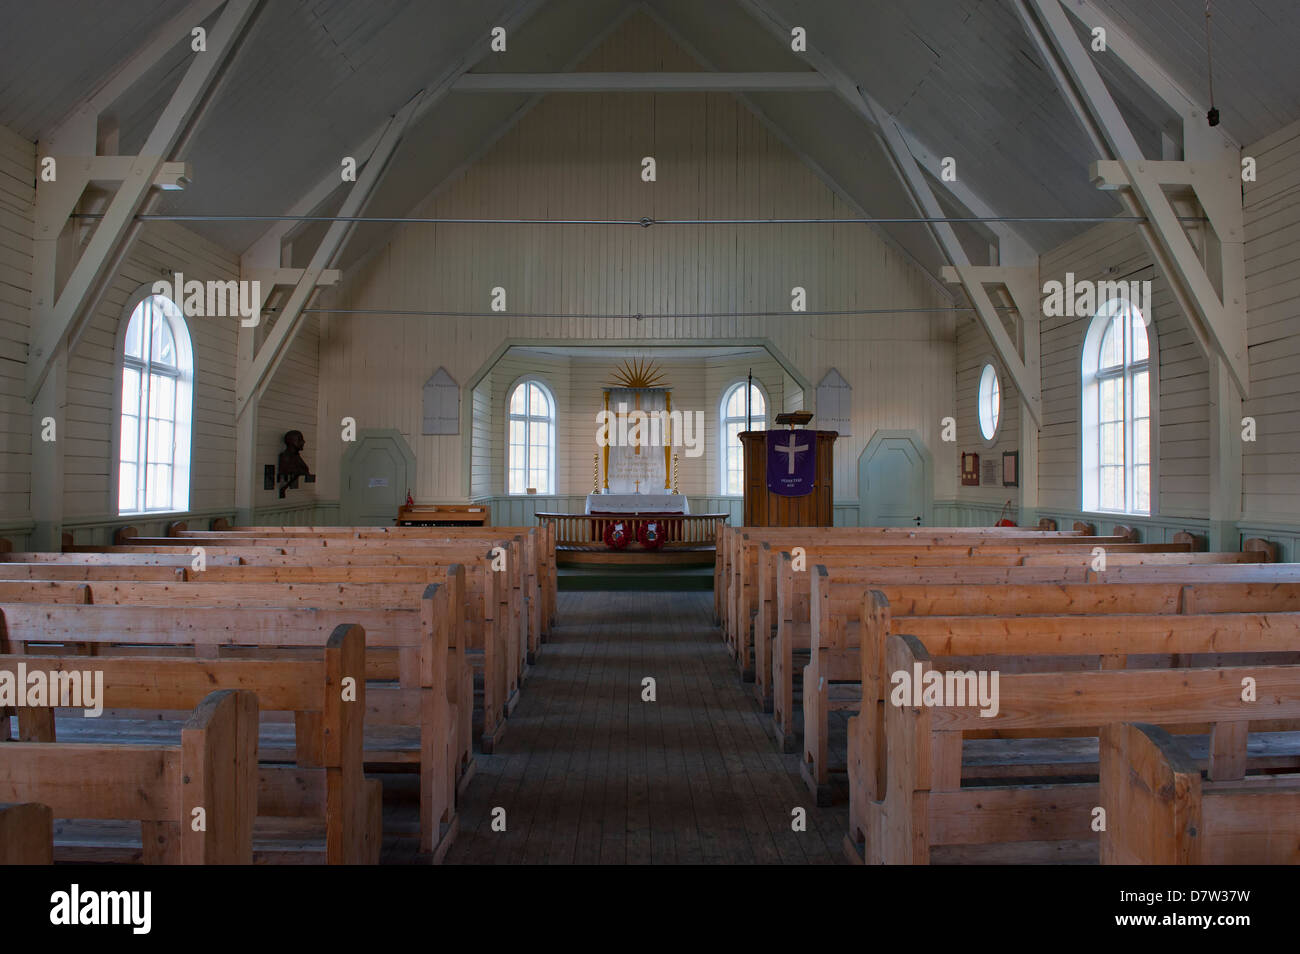 Interior of Whalers' Church, Former Grytviken Whaling Station, South Georgia Stock Photo